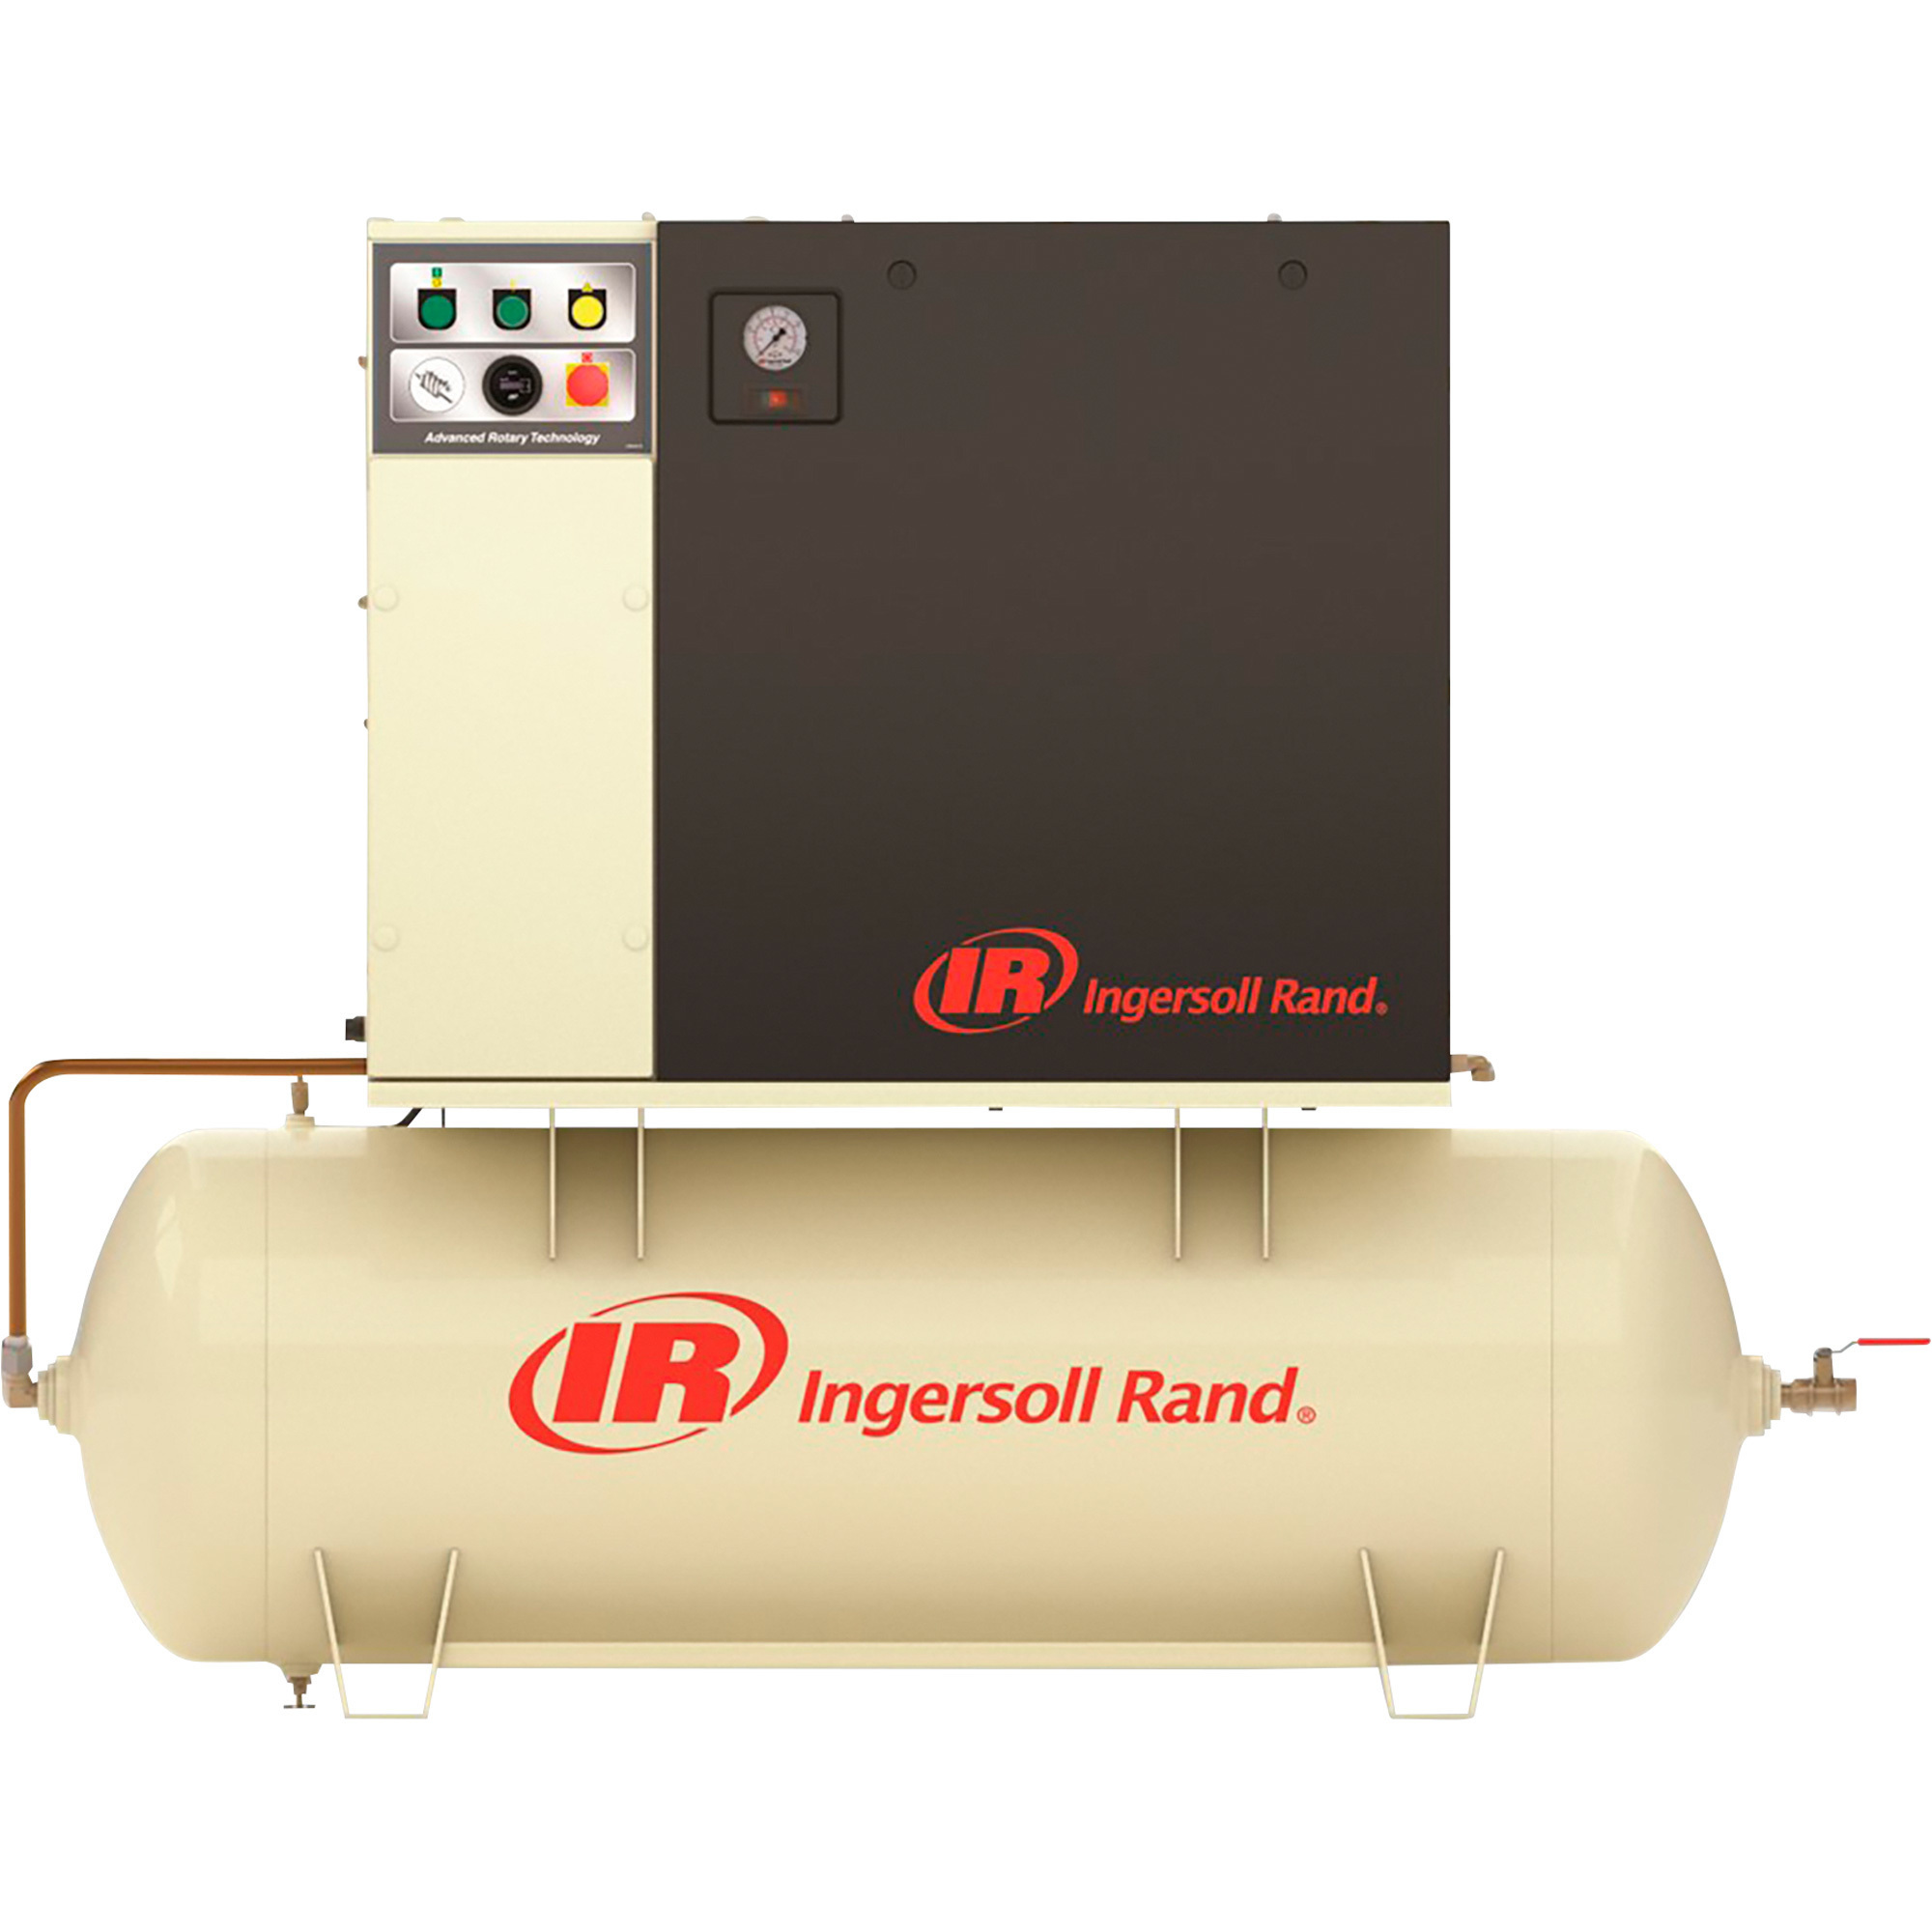 Ingersoll Rand Rotary Screw Air Compressor, 230 Volts, 3 Phase, 15 HP, 55 CFM, Model UP6-15c-125